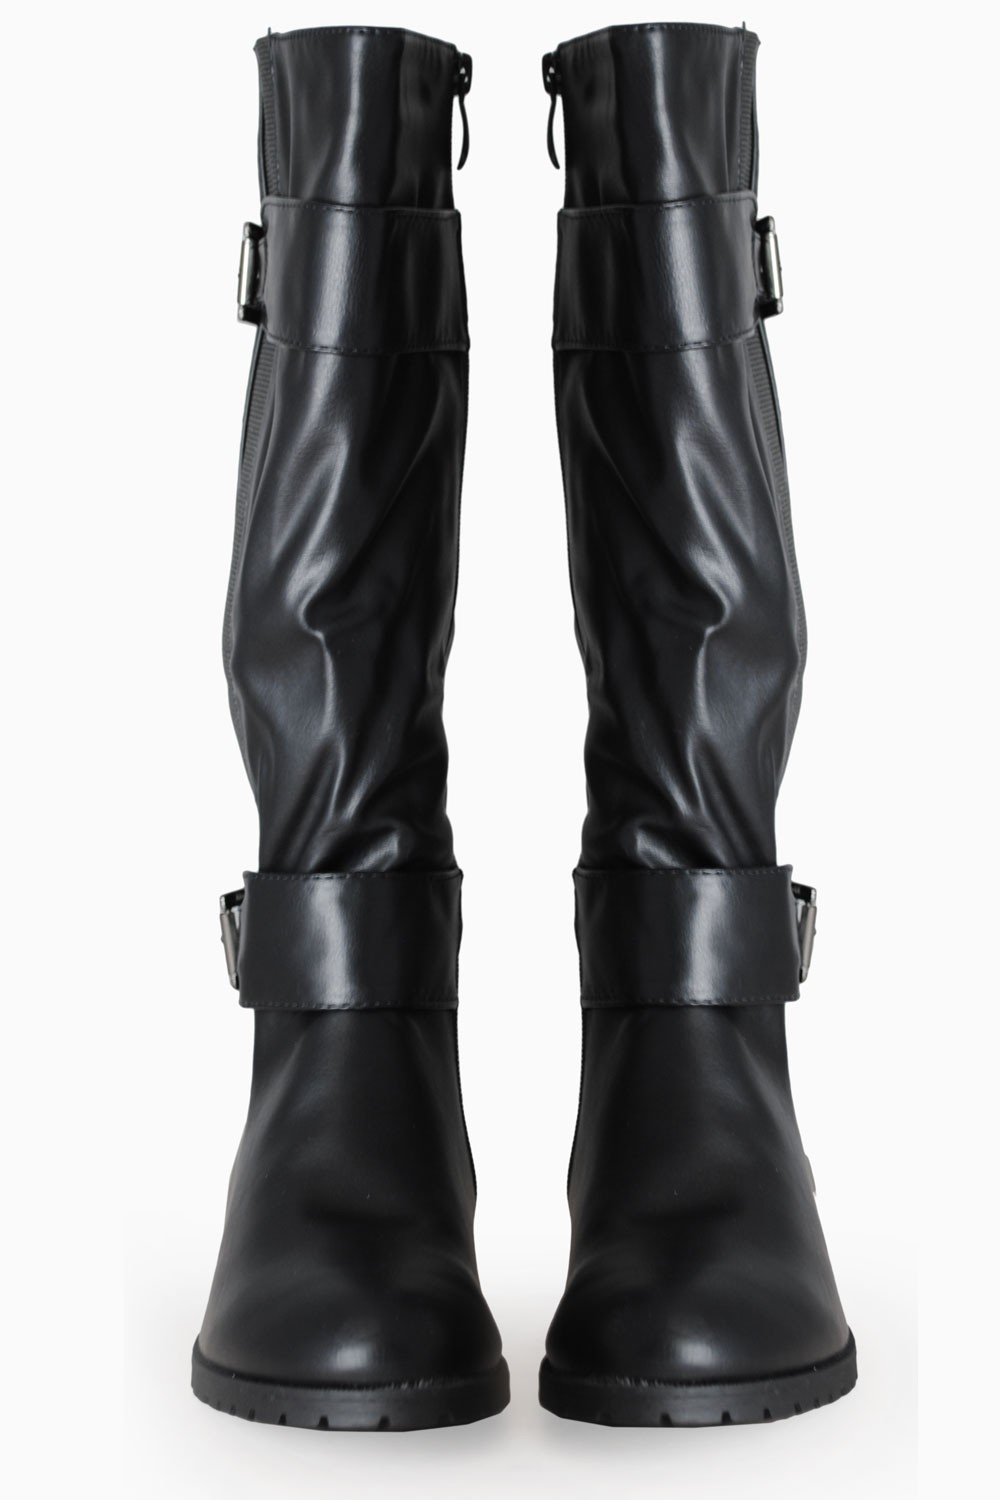 247 Kelly Buckled Knee High Boots in Black | iCLOTHING